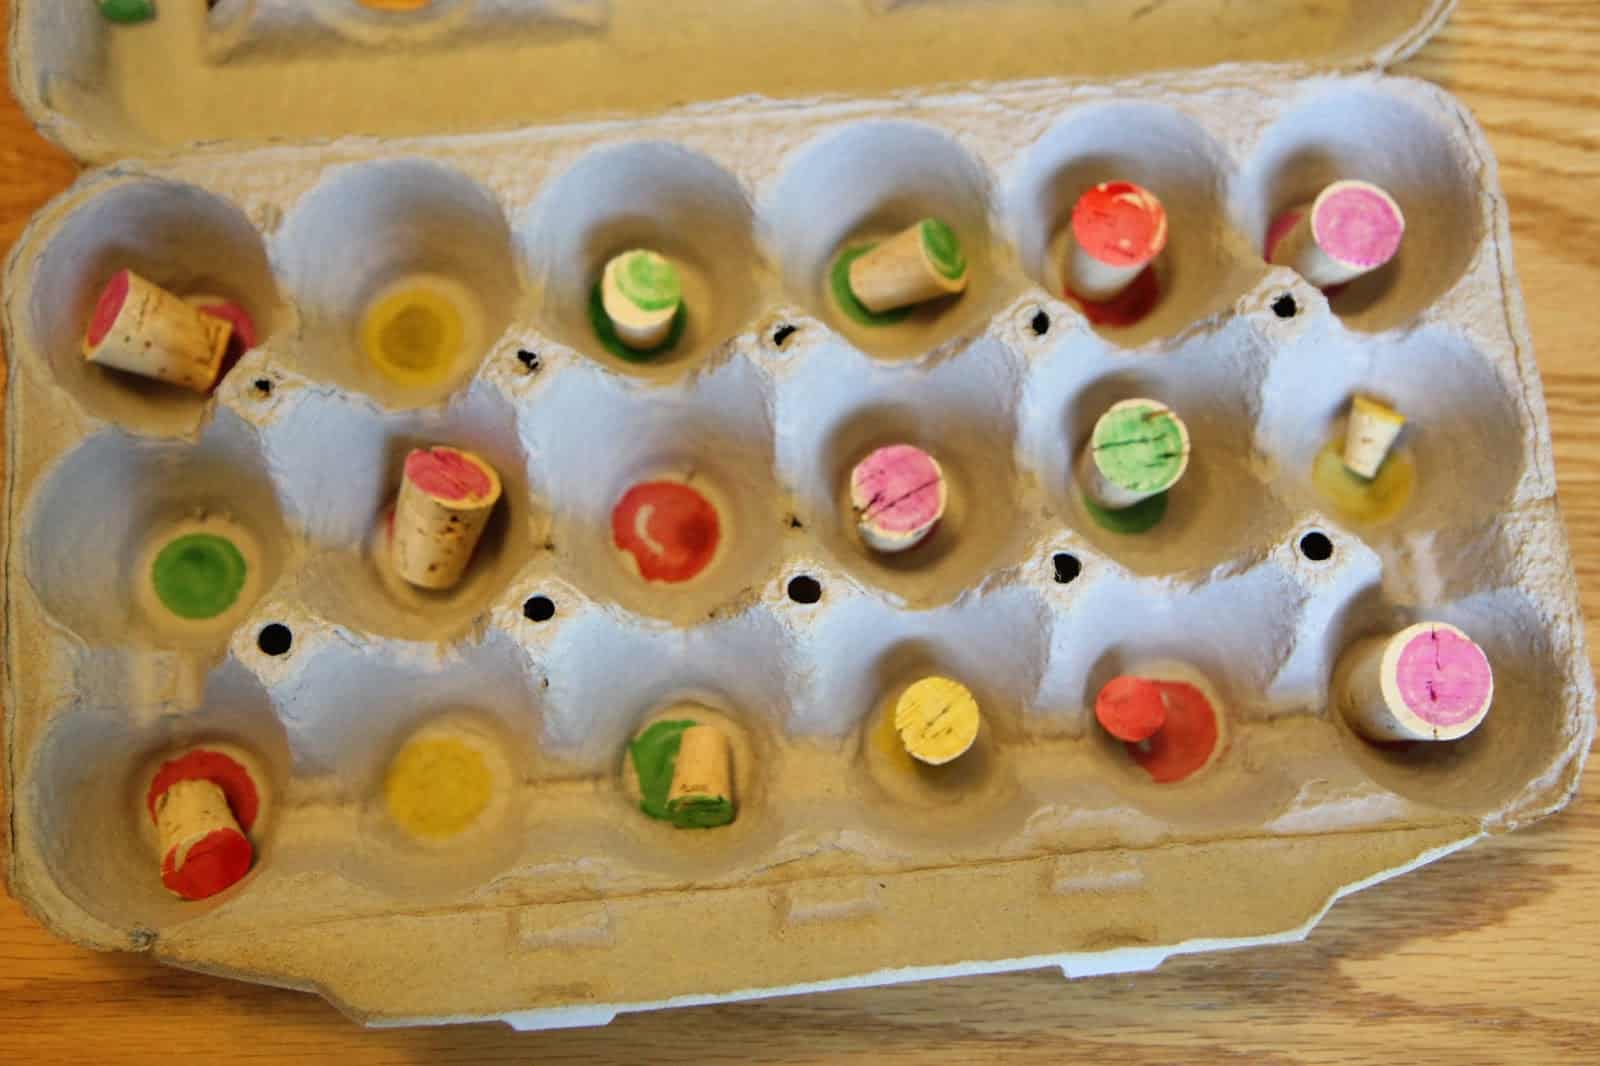 Let's Sort The Colors With Cork & Egg Carton CraftEgg carton crafts for 3 Year's old 